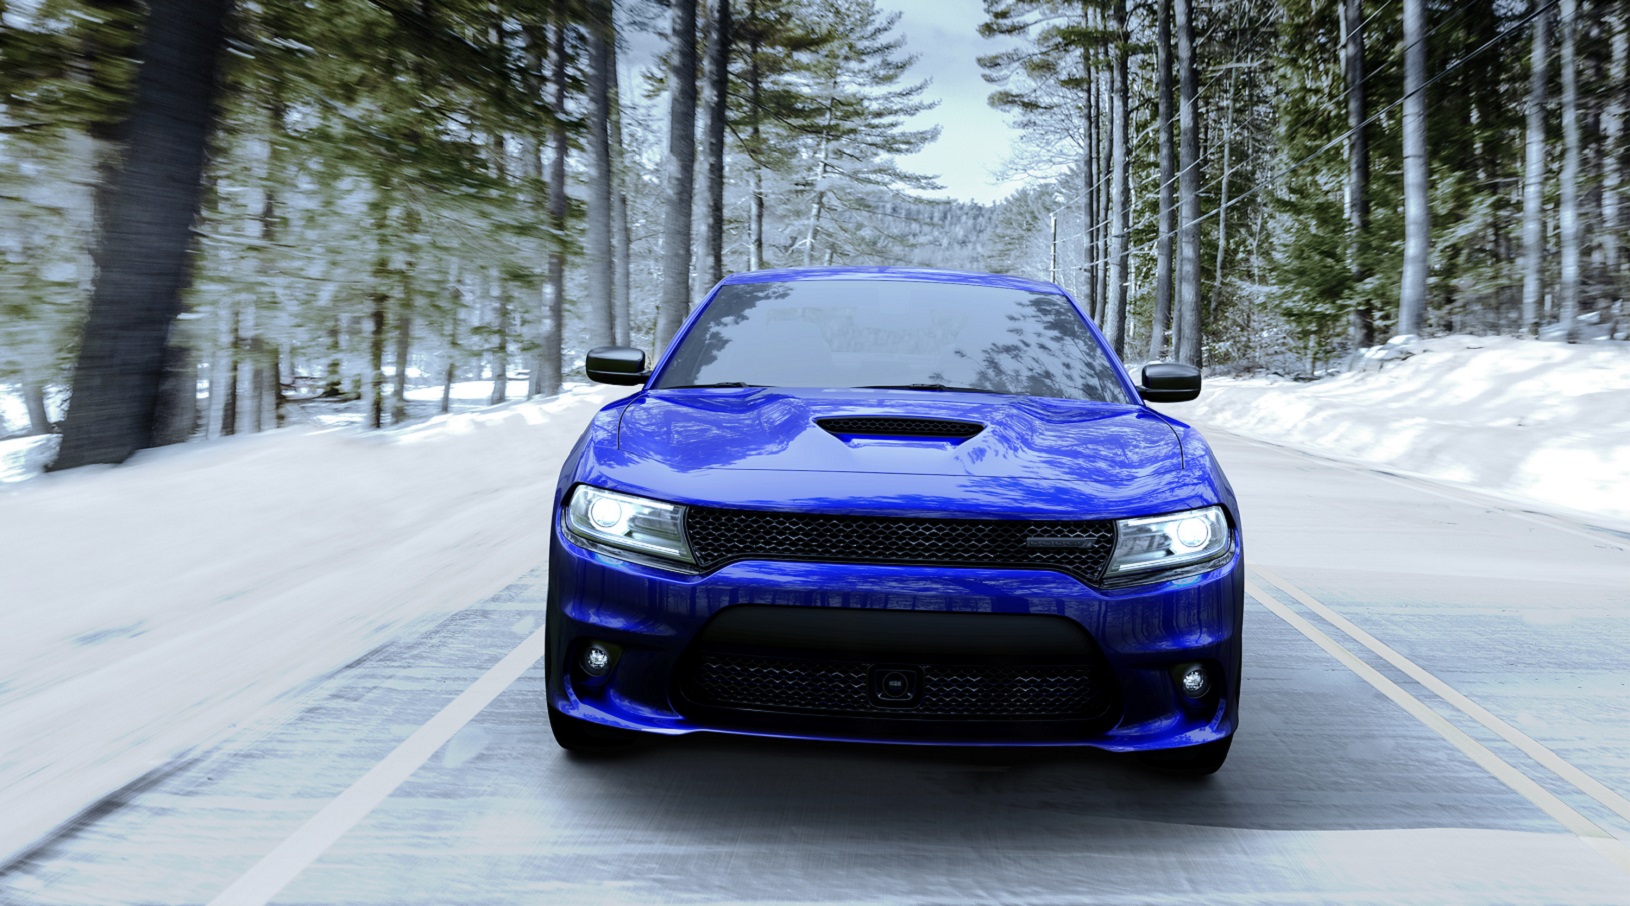 Winter warrior: New 2020 Dodge Charger GT all-wheel-drive delivers unparalleled year-round performance wrapped in muscle car attitude